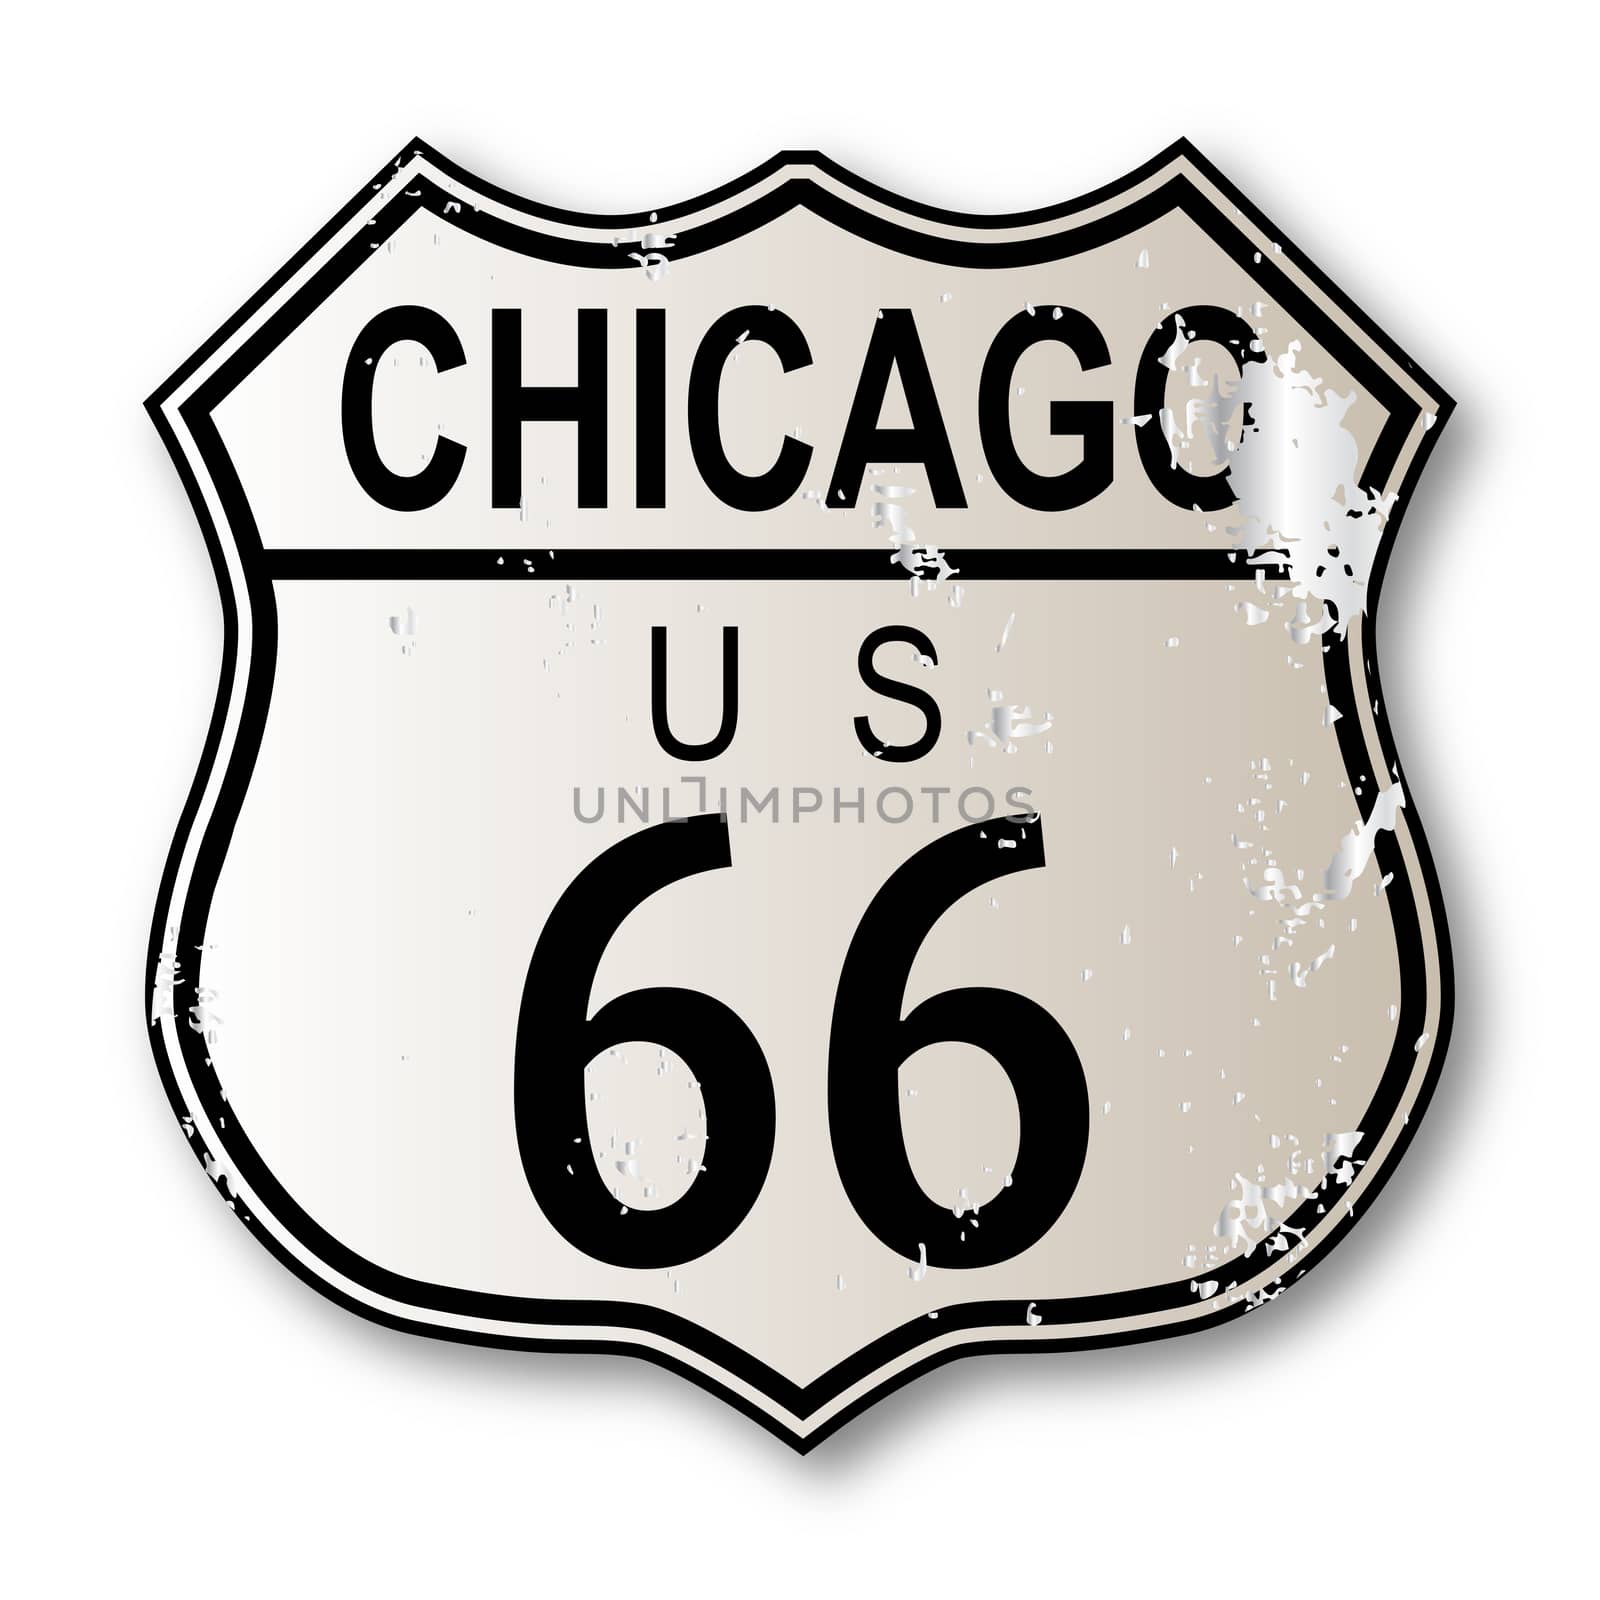 Chicago Route 66 Highway Sign by Bigalbaloo